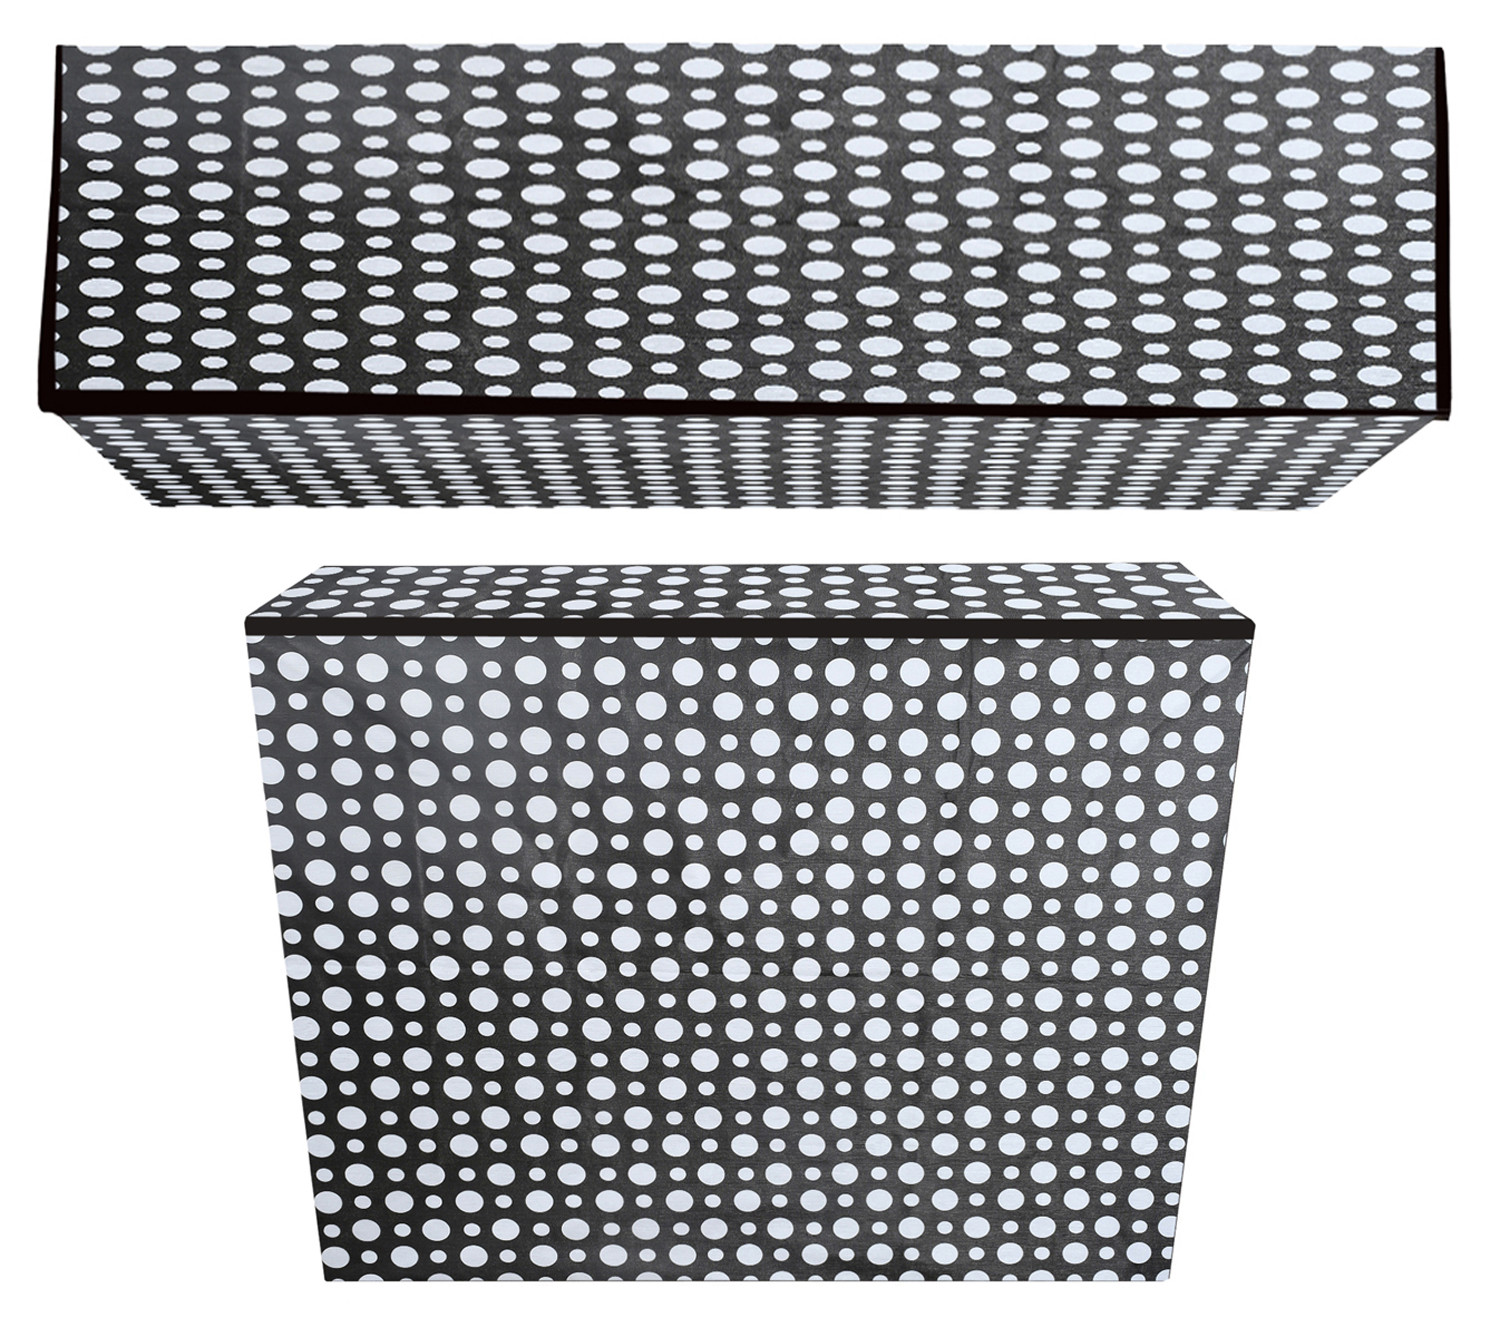 Kuber Industries Polka Dots Print PVC Air Conditioning Dust Cover Indoor and Outdoor Waterproof Folding Spilt Ac Cover Set 1.5 Ton AC (Black)